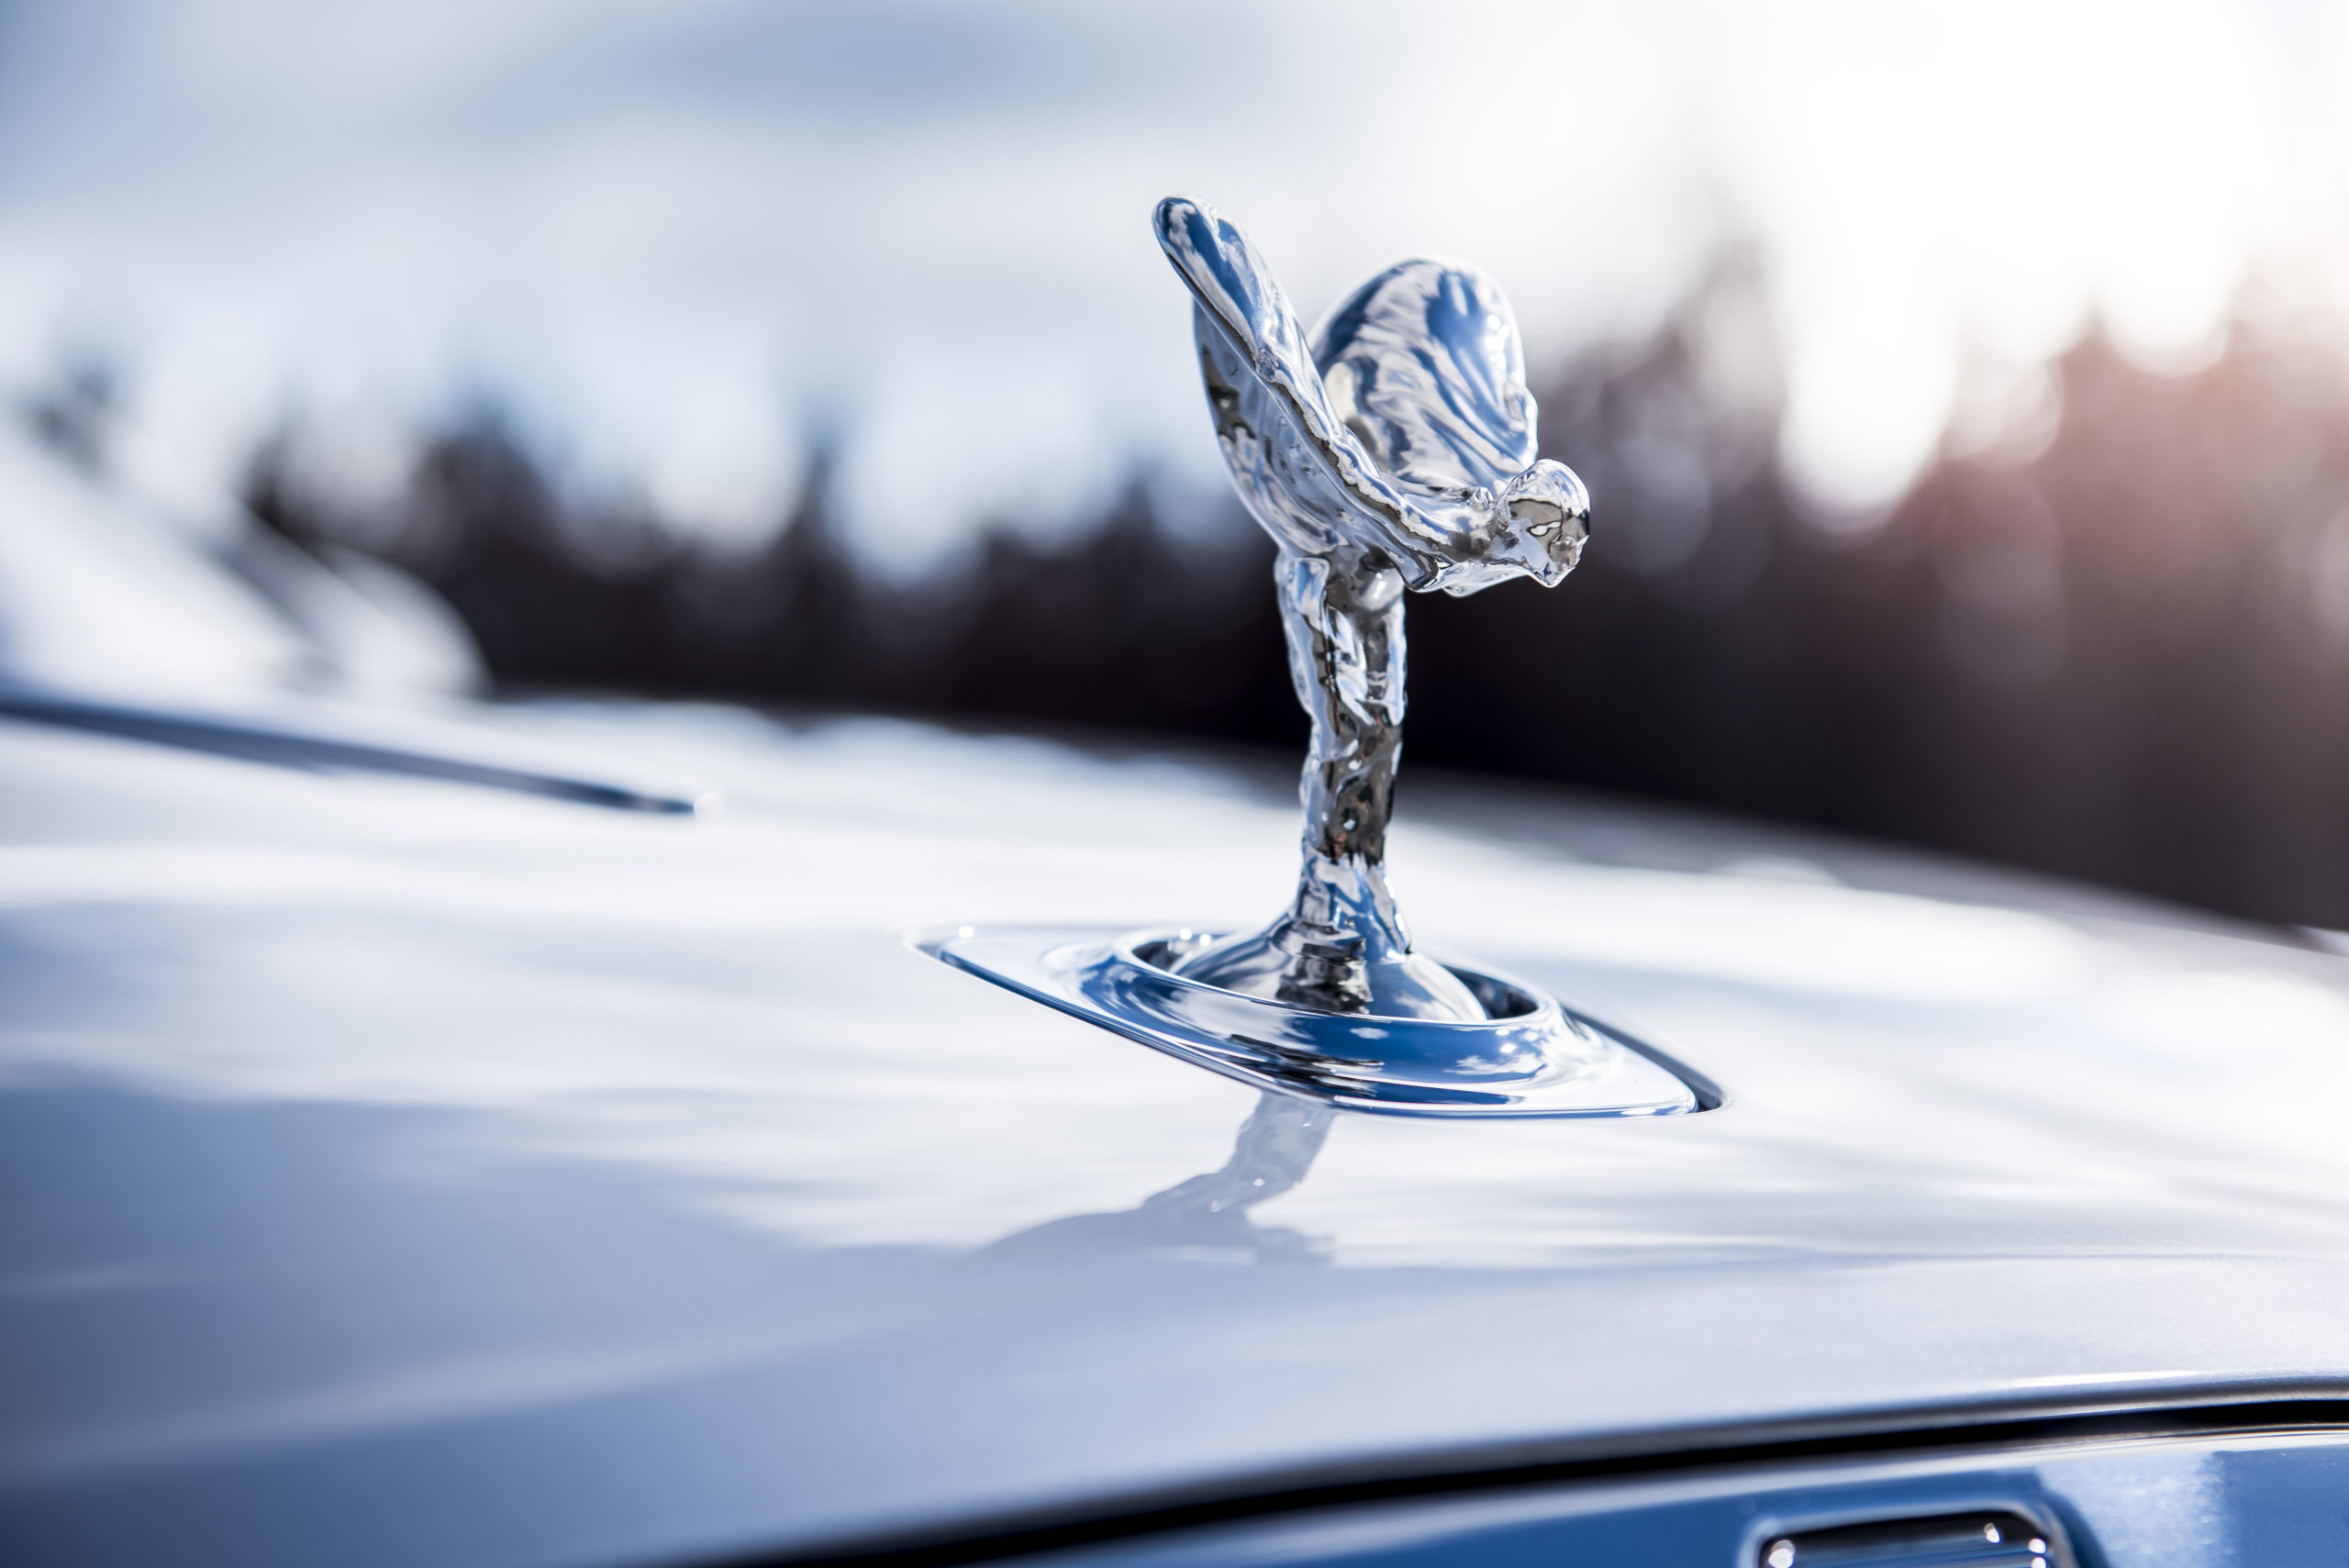 Rolls-Royce Motor Cars to Suspend Production at the Company’s Goodwood-Based Manufacturing Plant